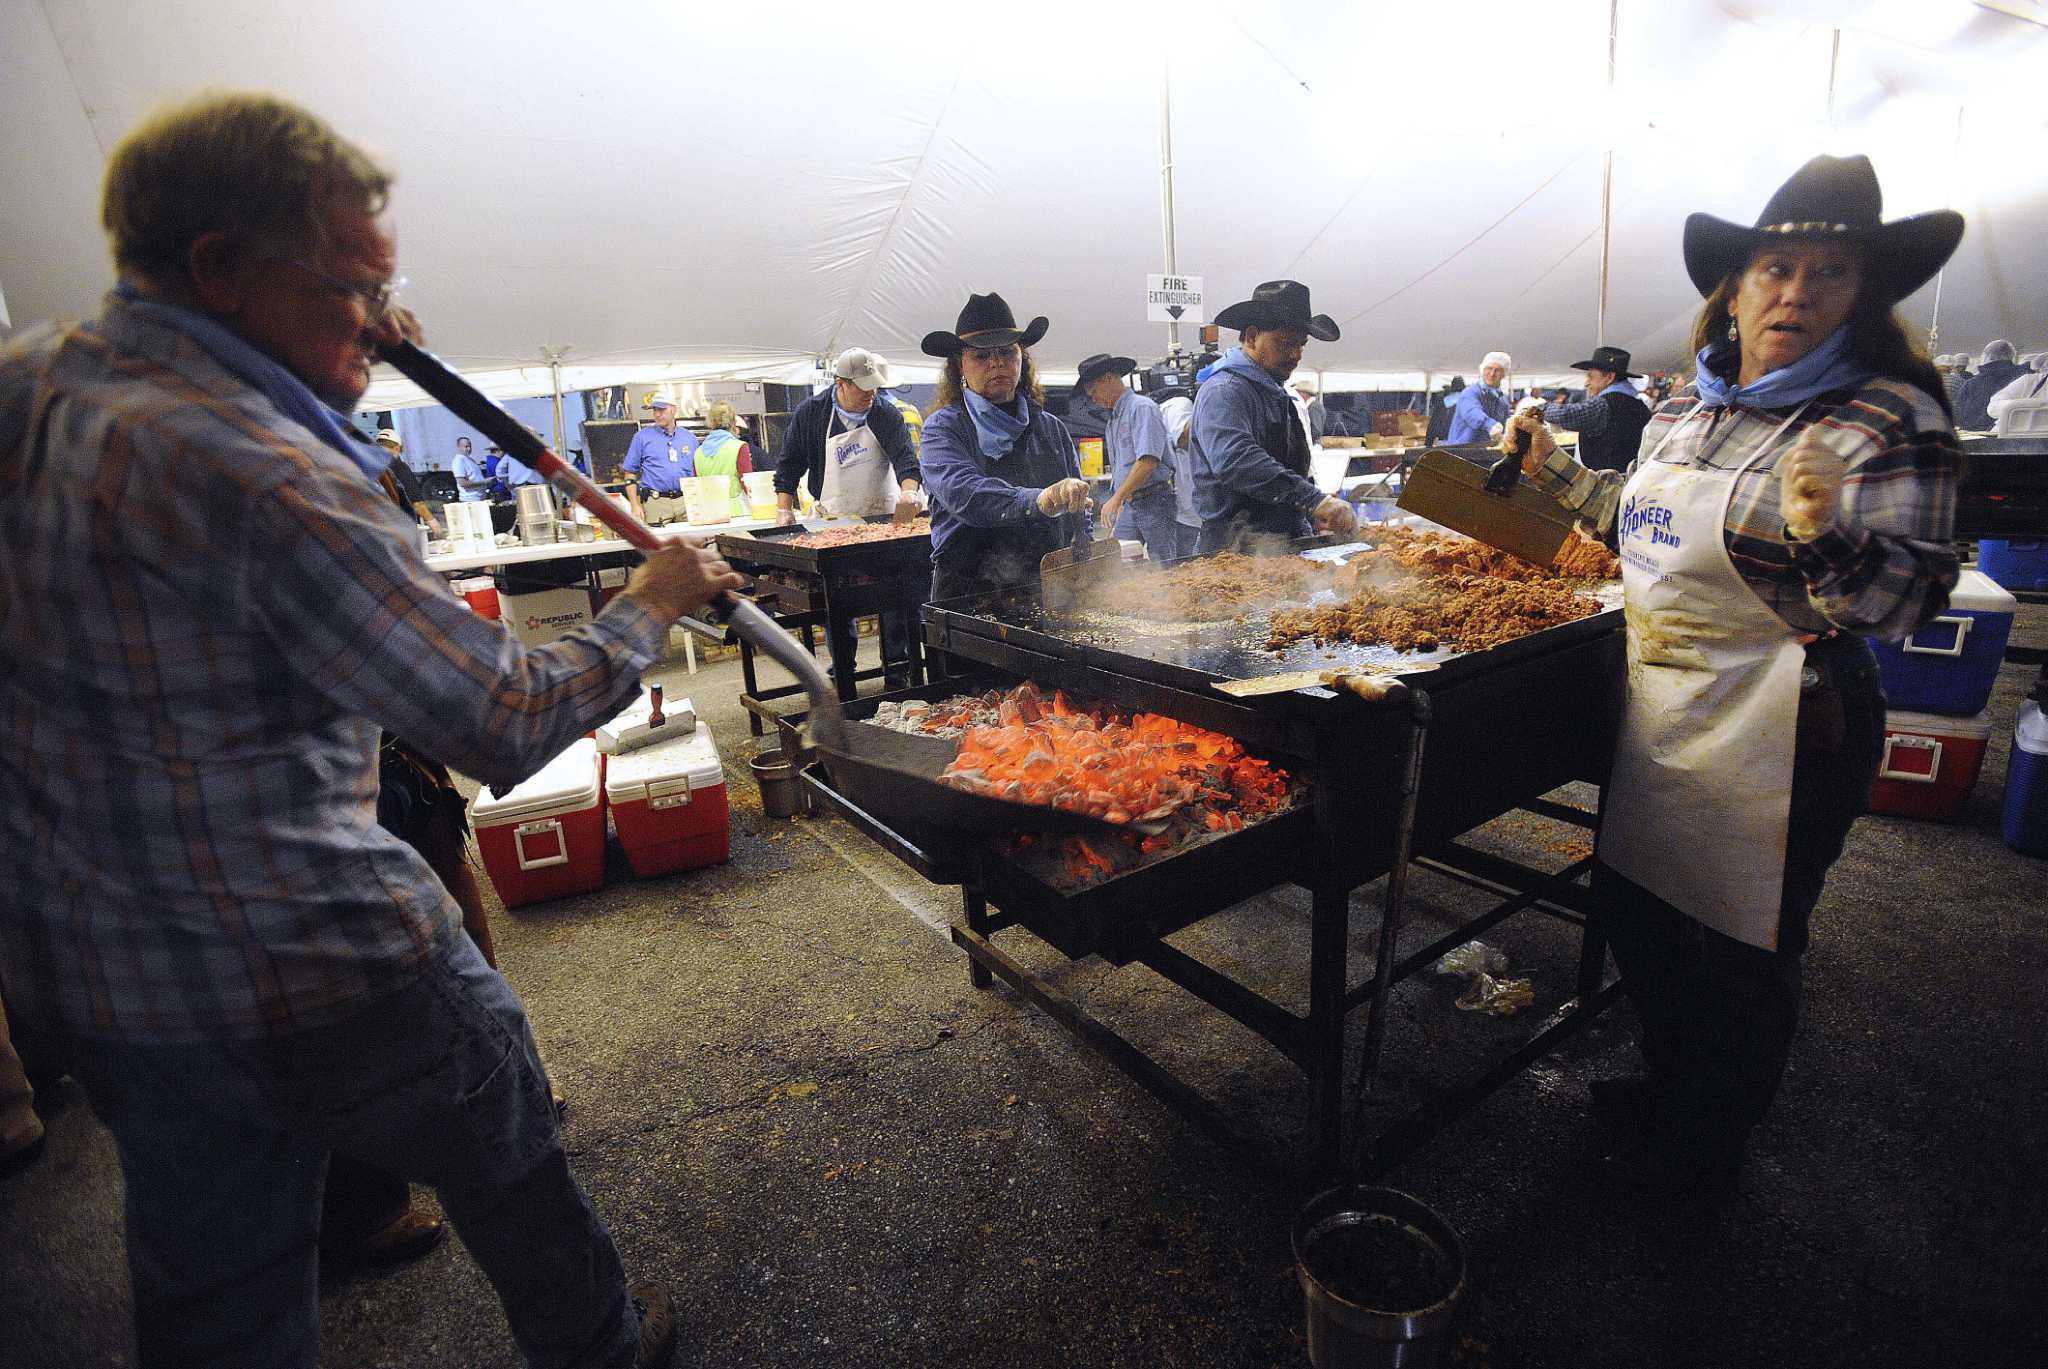 The 36th annual Cowboy Breakfast expects to lure 50,000 for free tacos